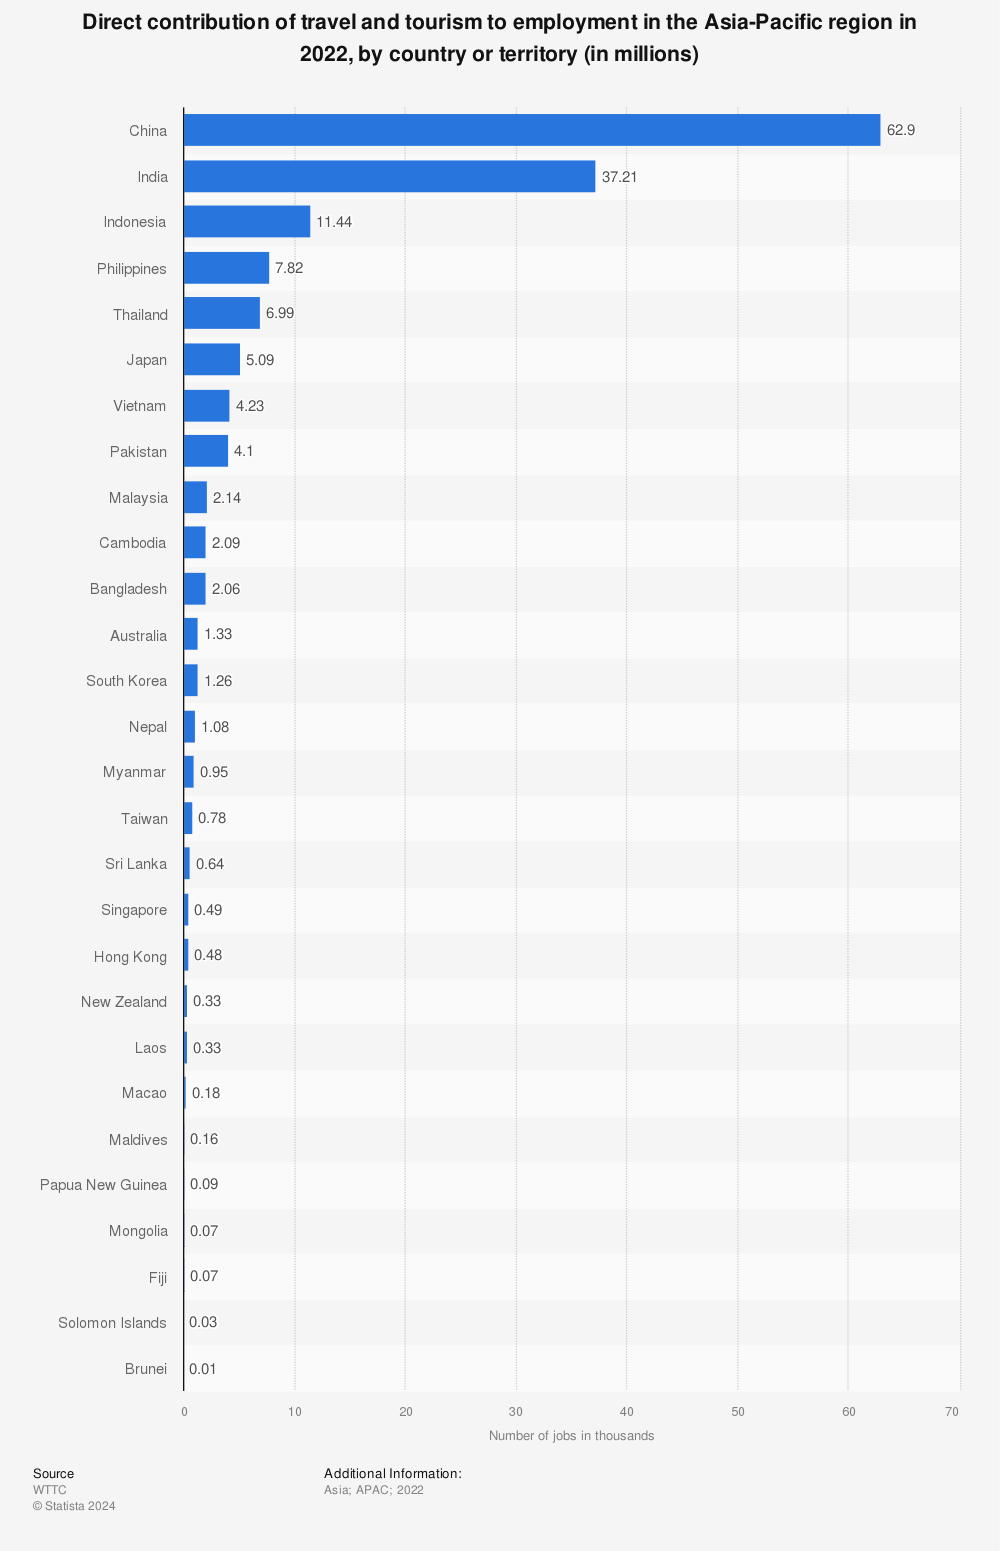 Statistic: Direct contribution of travel and tourism to employment in the Asia-Pacific region in 2020, by country (in 1,000s) | Statista